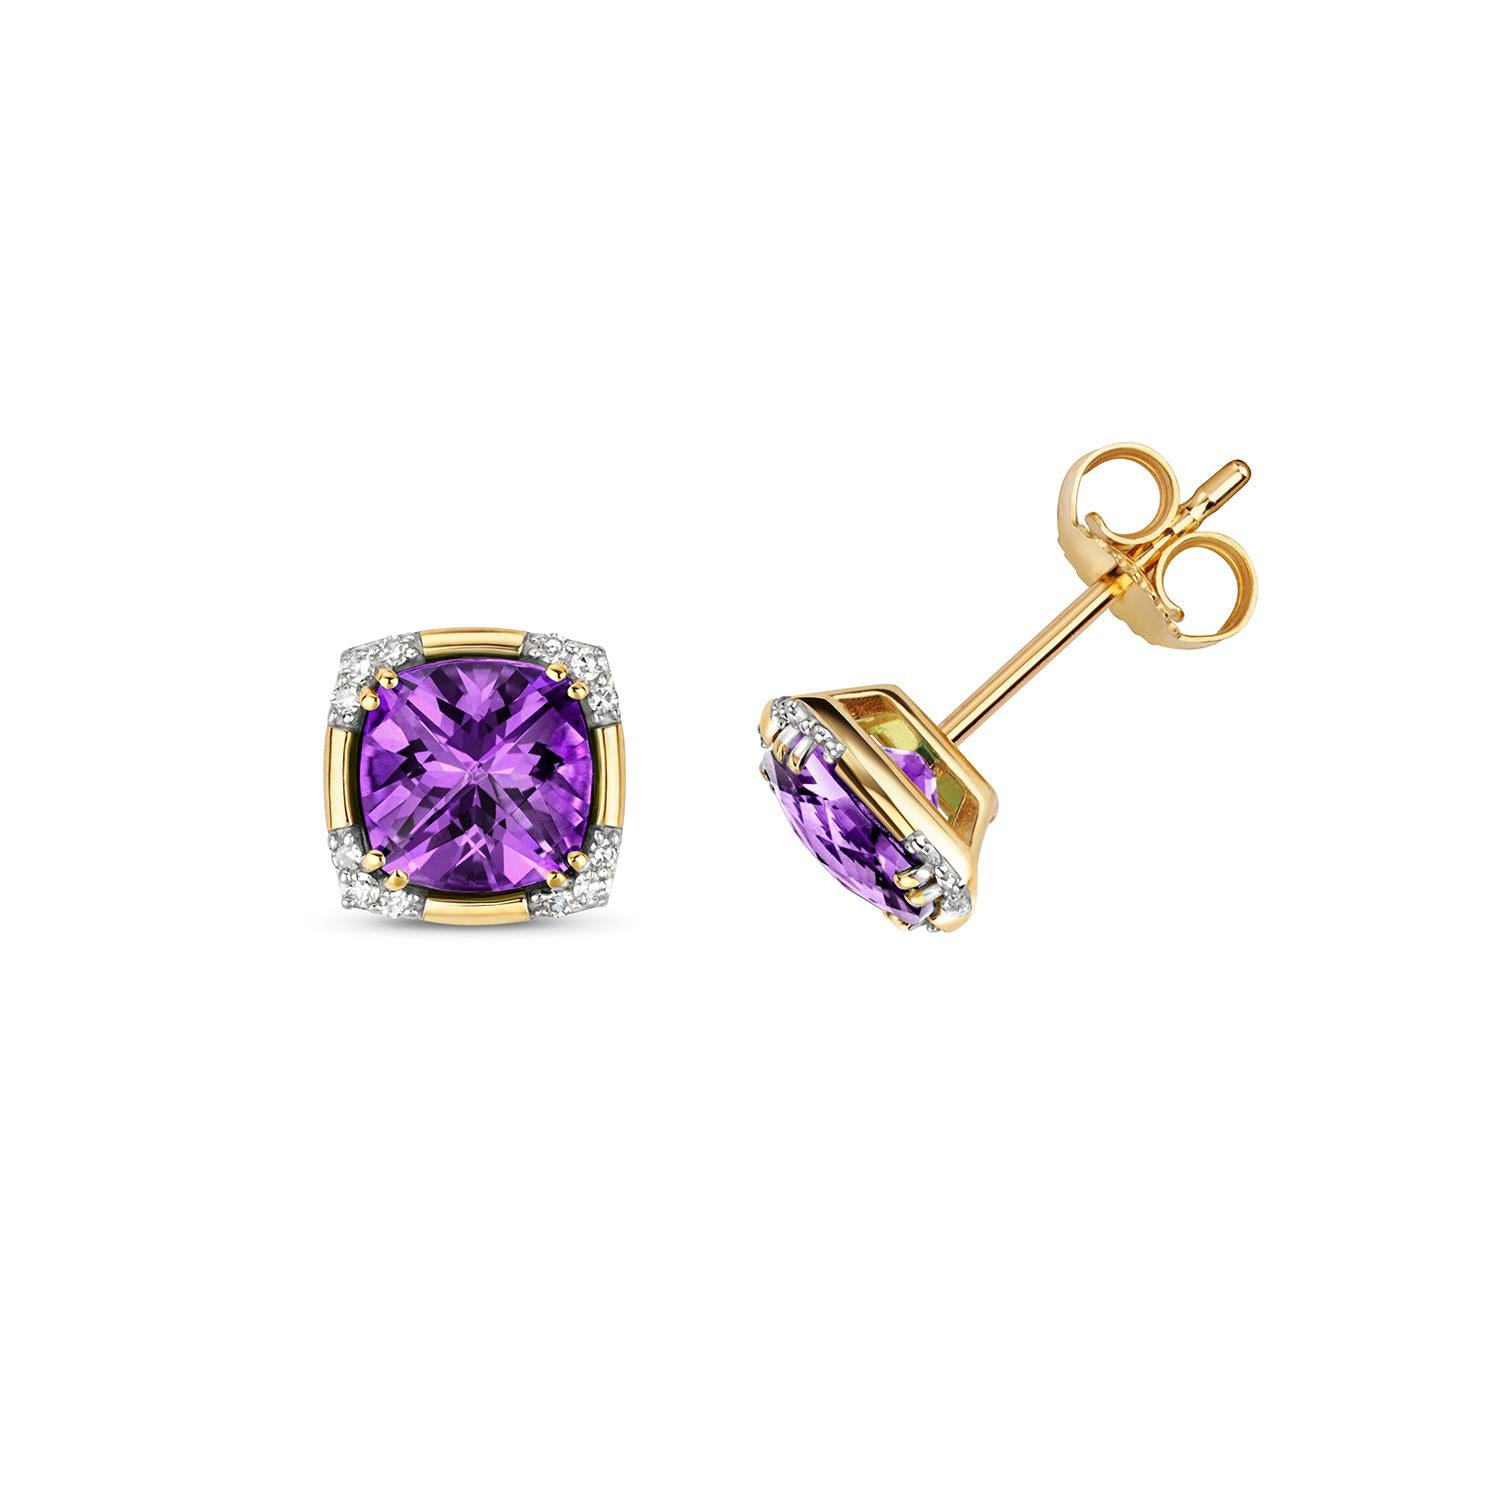 DIAMOND & CU AMETHYST STUDS

9CT Y/G SC/0.06CT AMT/1.64CT

Weight: 1.2g

Number Of Stones:2+24

Total Carates:1.640+0.060